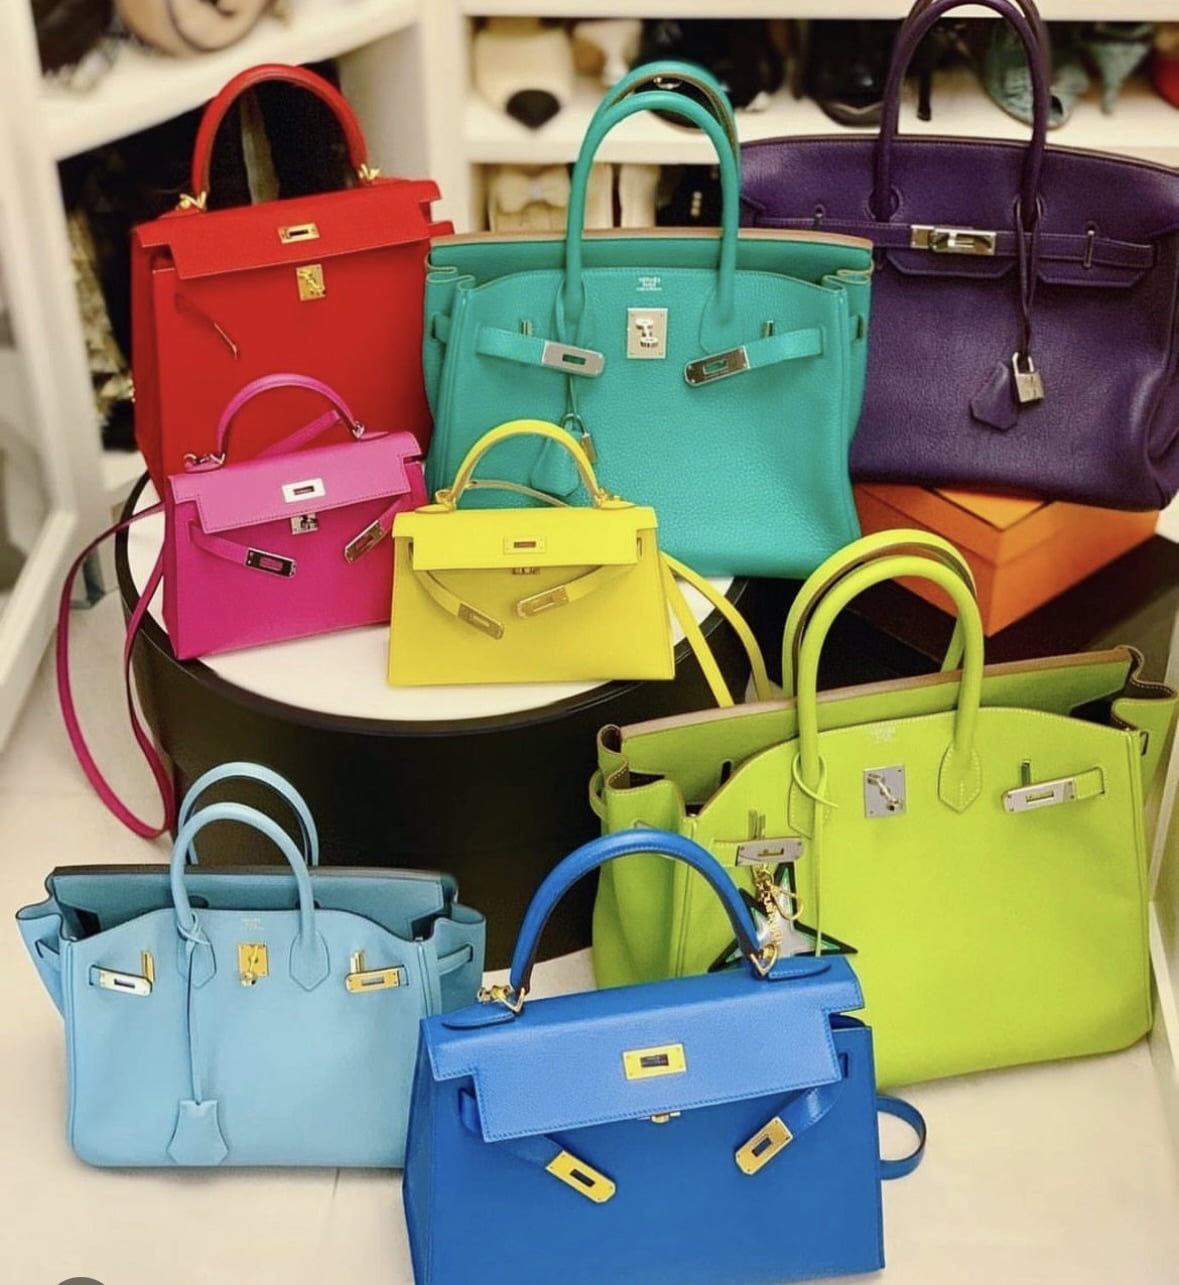 How Does the Kelly Weigh in in Comparison to the Birkin? - PurseBop